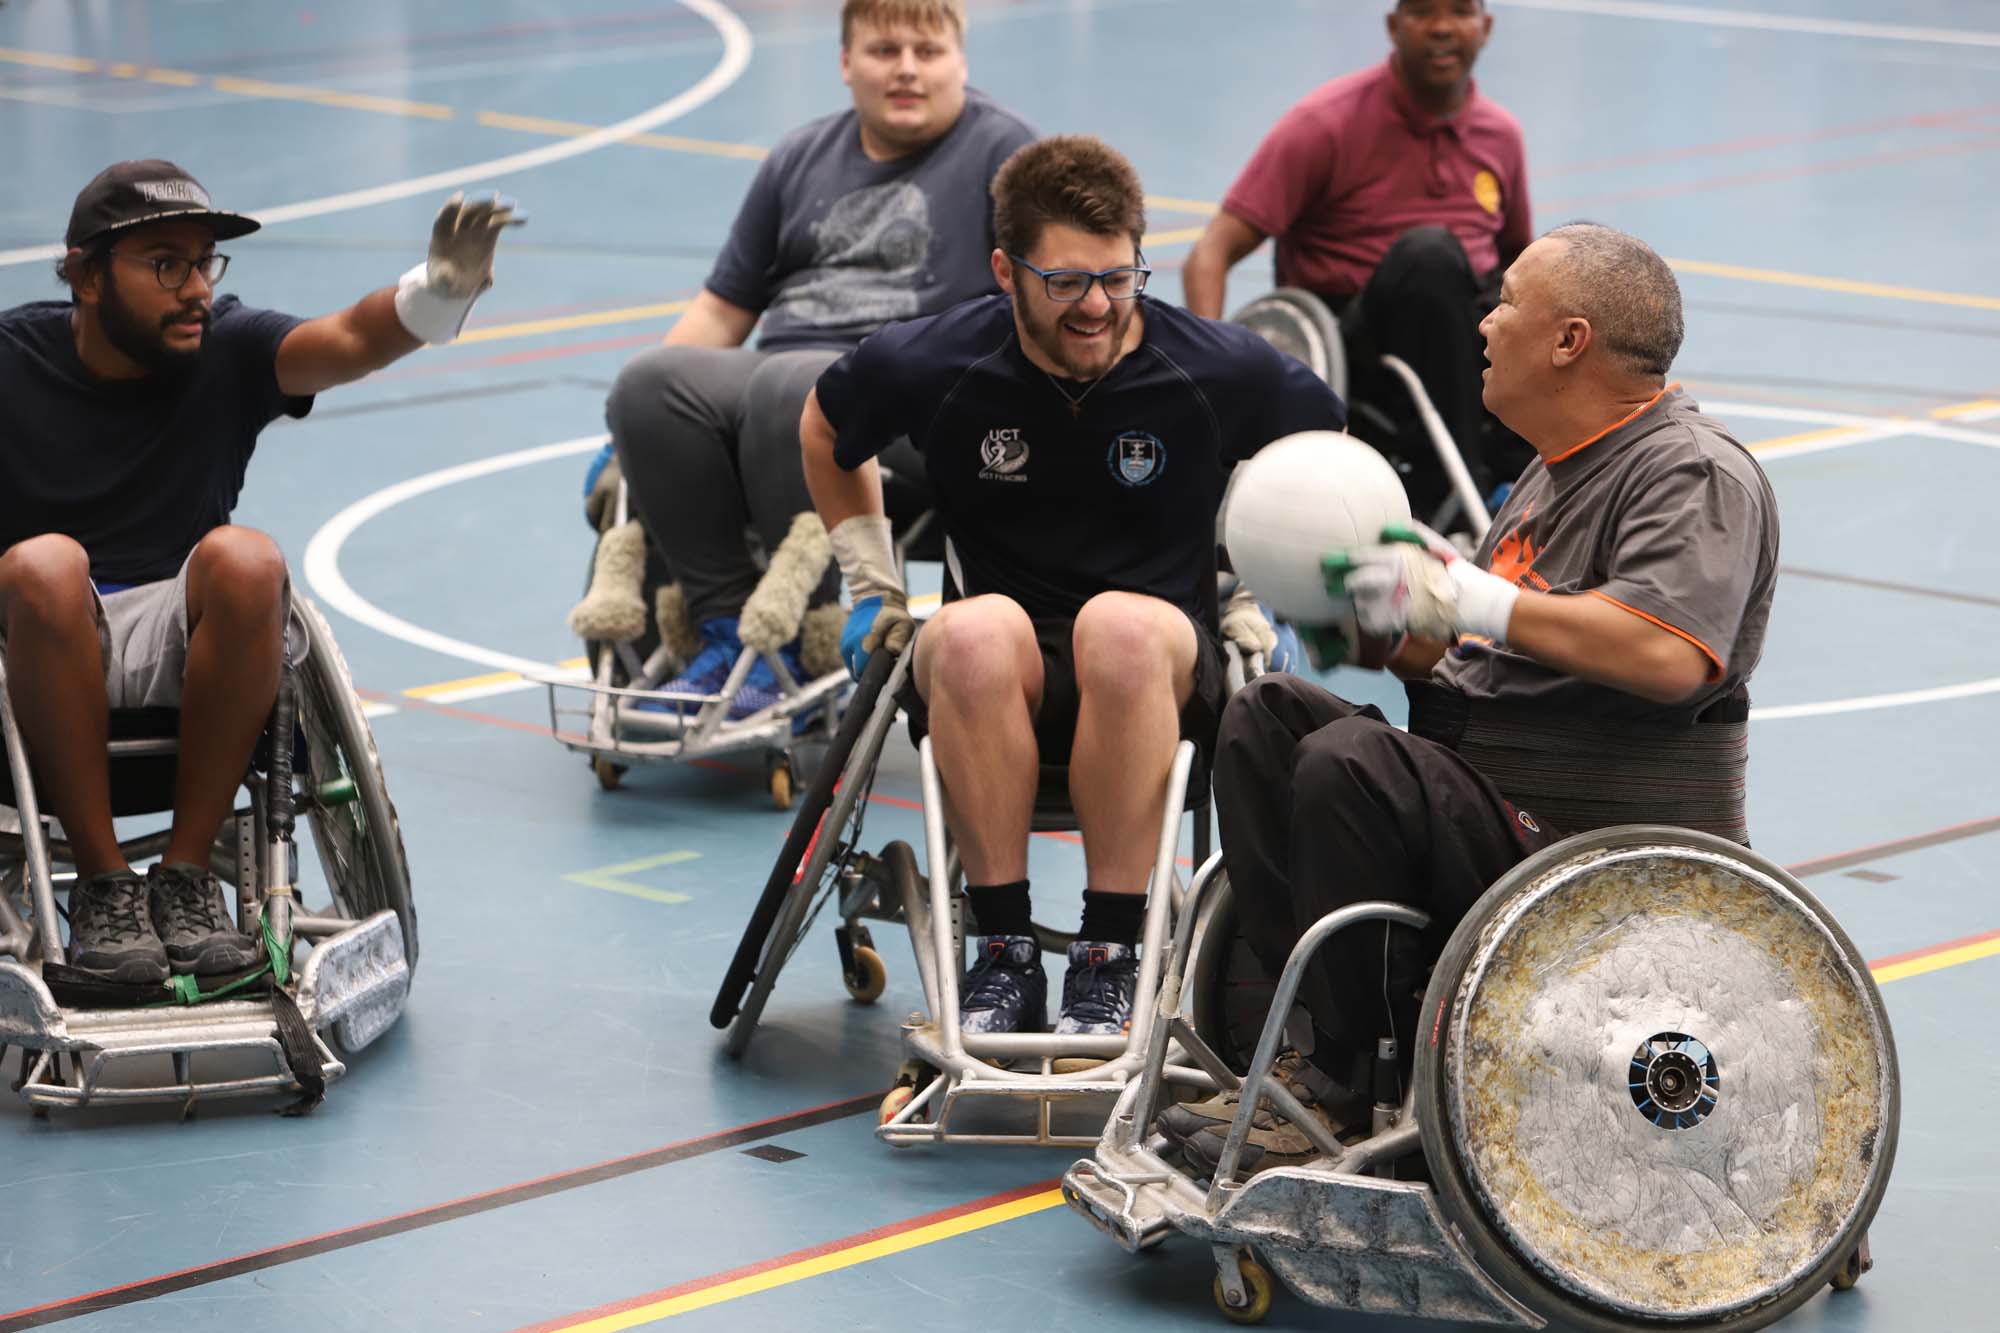 Hosted in support of sports for people with disabilities, the Interclub Wheelchair Rugby Tournament took place in May at the UCT Sports Centre.